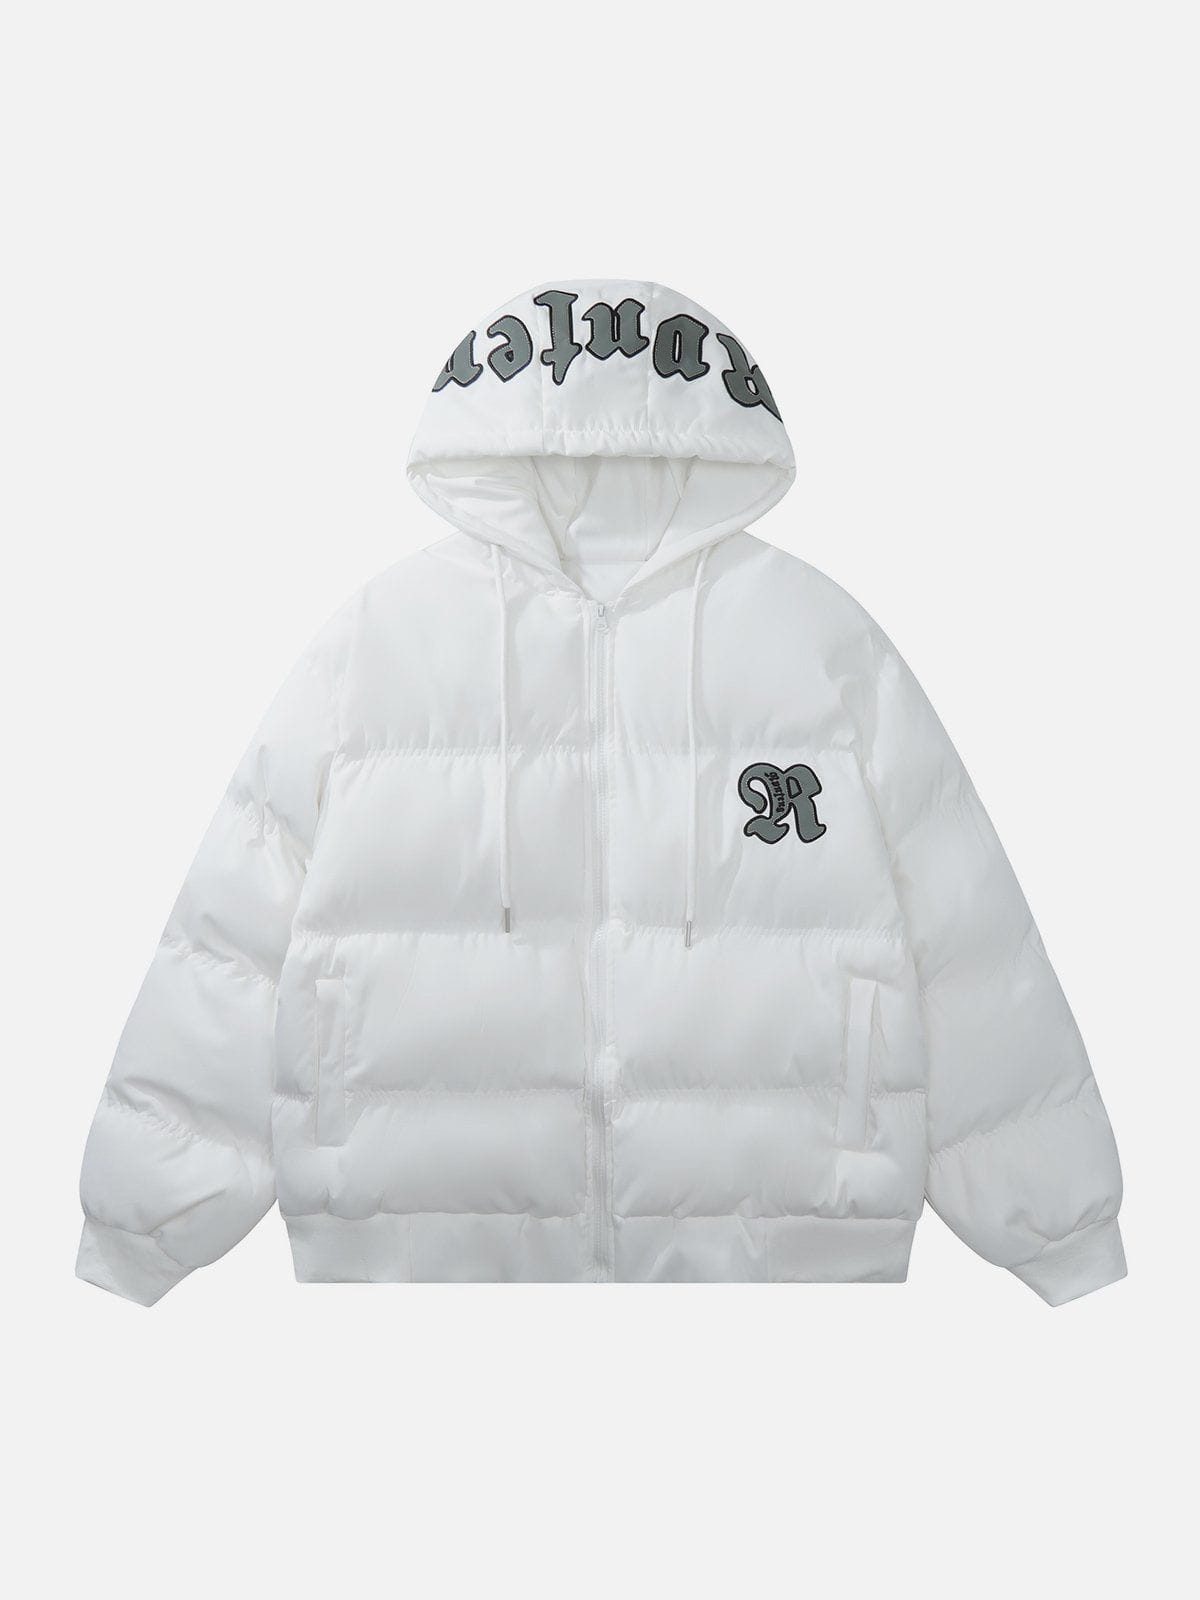 Eprezzy® - Letter Patch Embroidered Hooded Winter Coat Streetwear Fashion - eprezzy.com